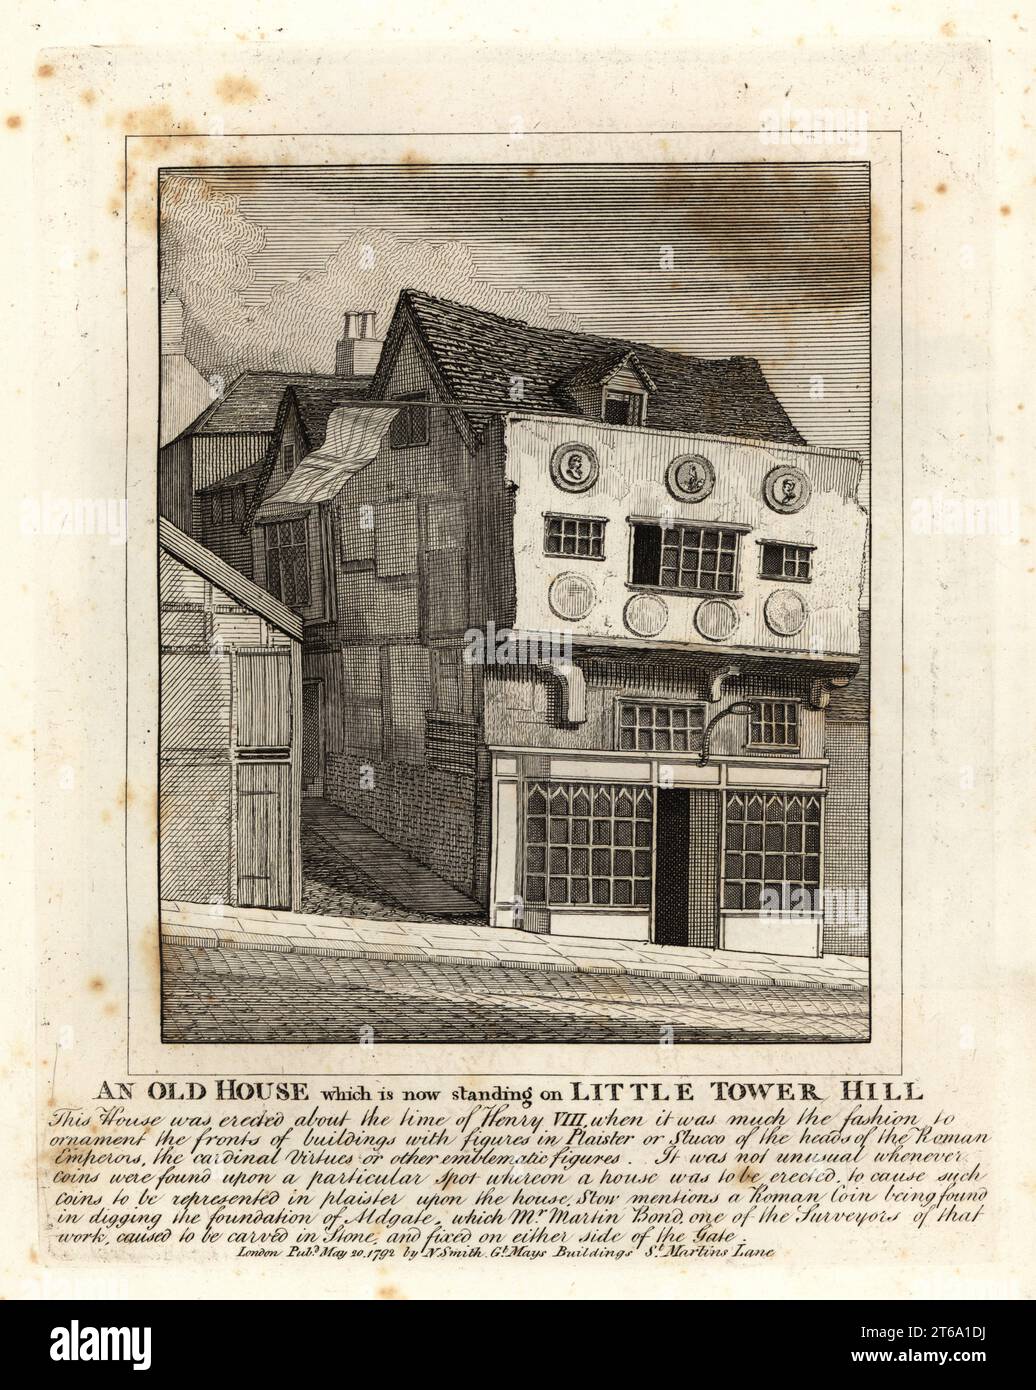 An old Tudor house standing on Little Tower Hill, London. Built in the time of Henry VIII with heads of Roman Emperors in plaster or stucco on the front. Copperplate engraving by John Thomas Smith after original drawings by members of the Society of Antiquaries from his J.T. Smiths Antiquities of London and its Environs, J. Sewell, R. Folder, J. Simco, London, 1792. Stock Photo